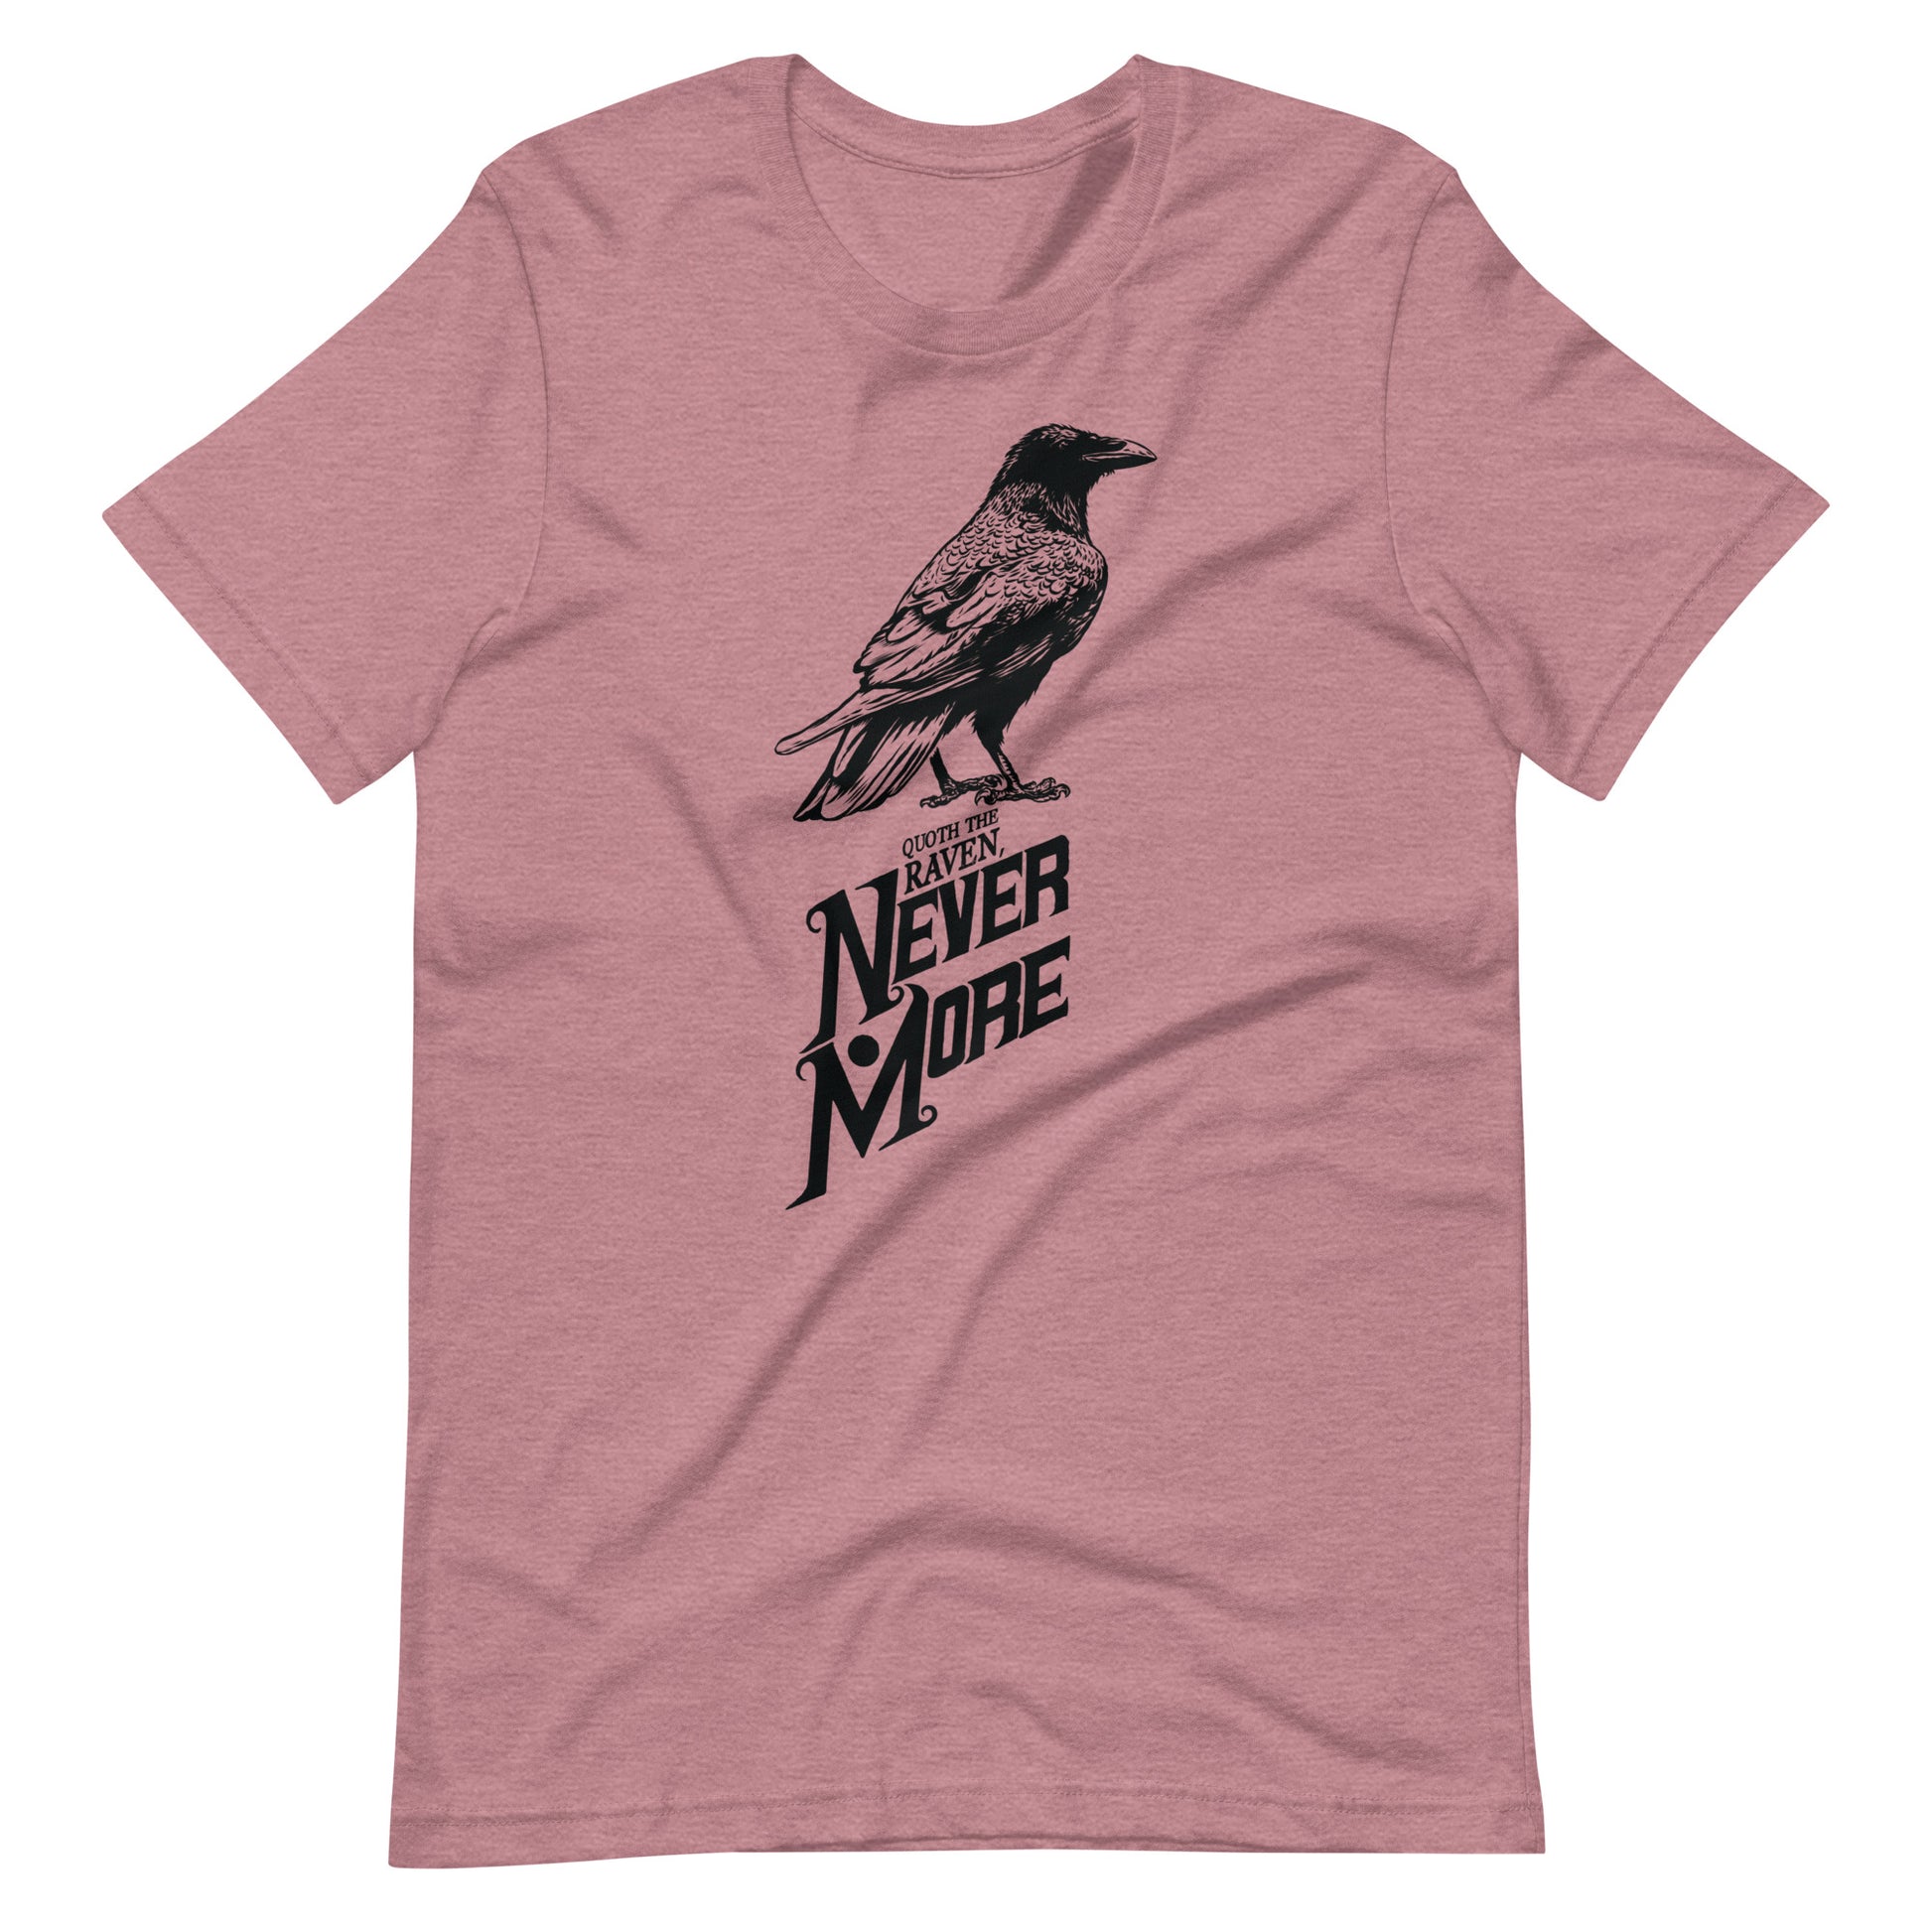 Quoth the Raven Nevermore - Men's t-shirt - Heather Orchid Front